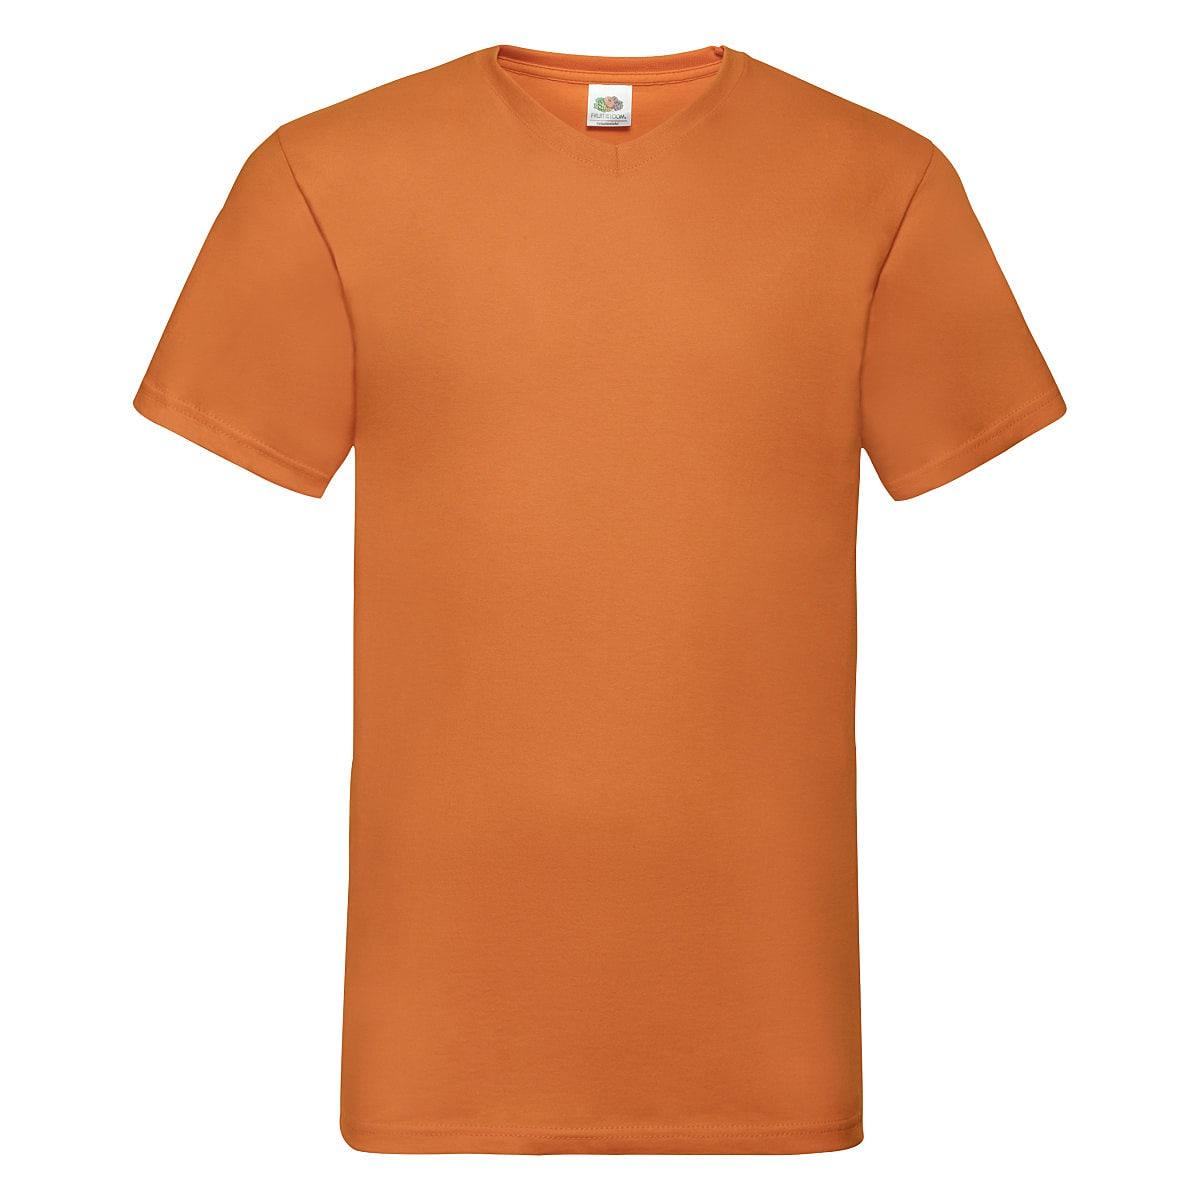 Fruit Of The Loom Valueweight V-Neck T-Shirt in Orange (Product Code: 61066)